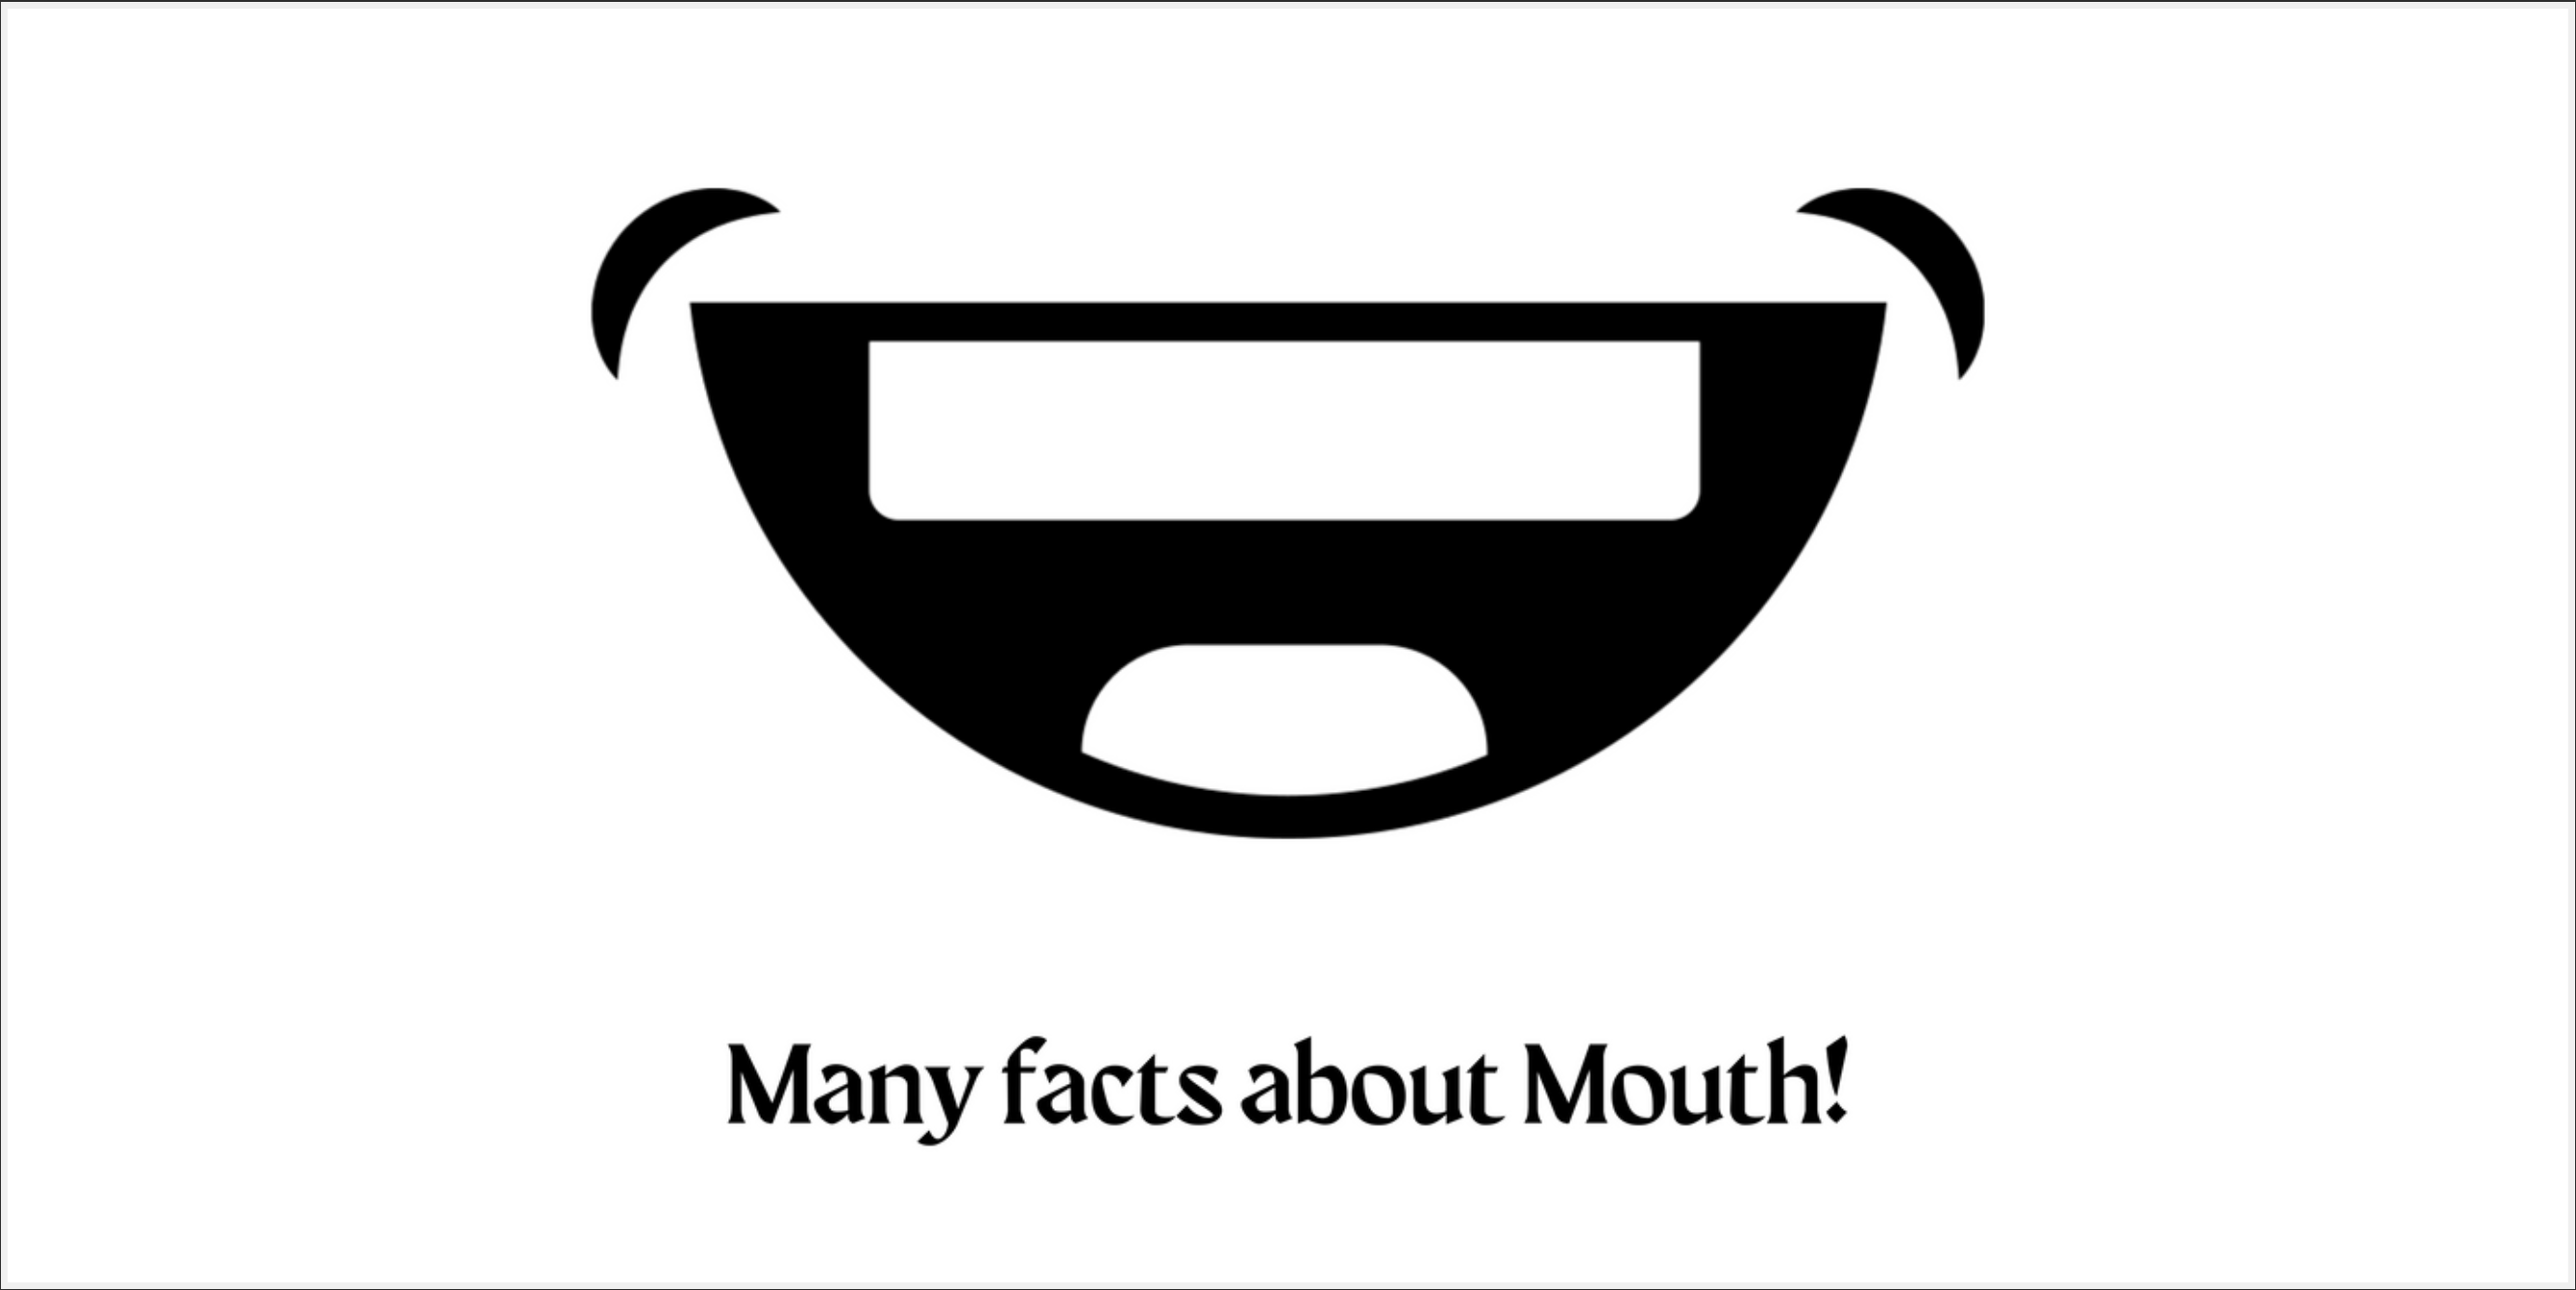 Many facts about mouth!